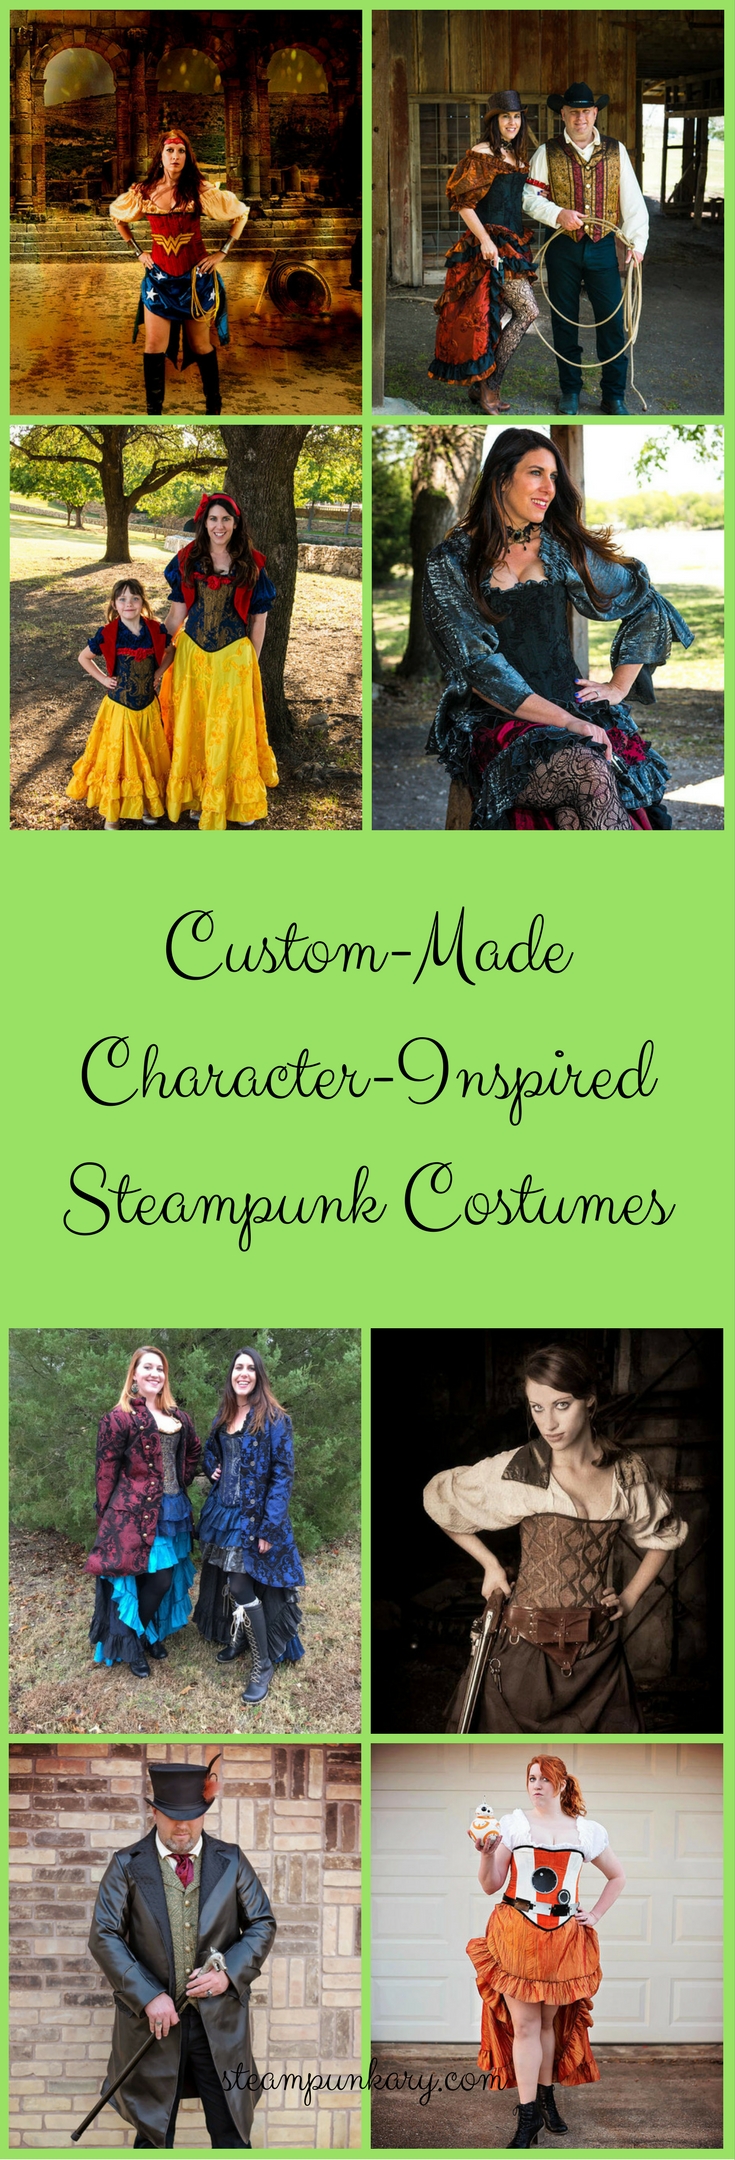 Custom-Made Character-Inspired Steampunk Costumes